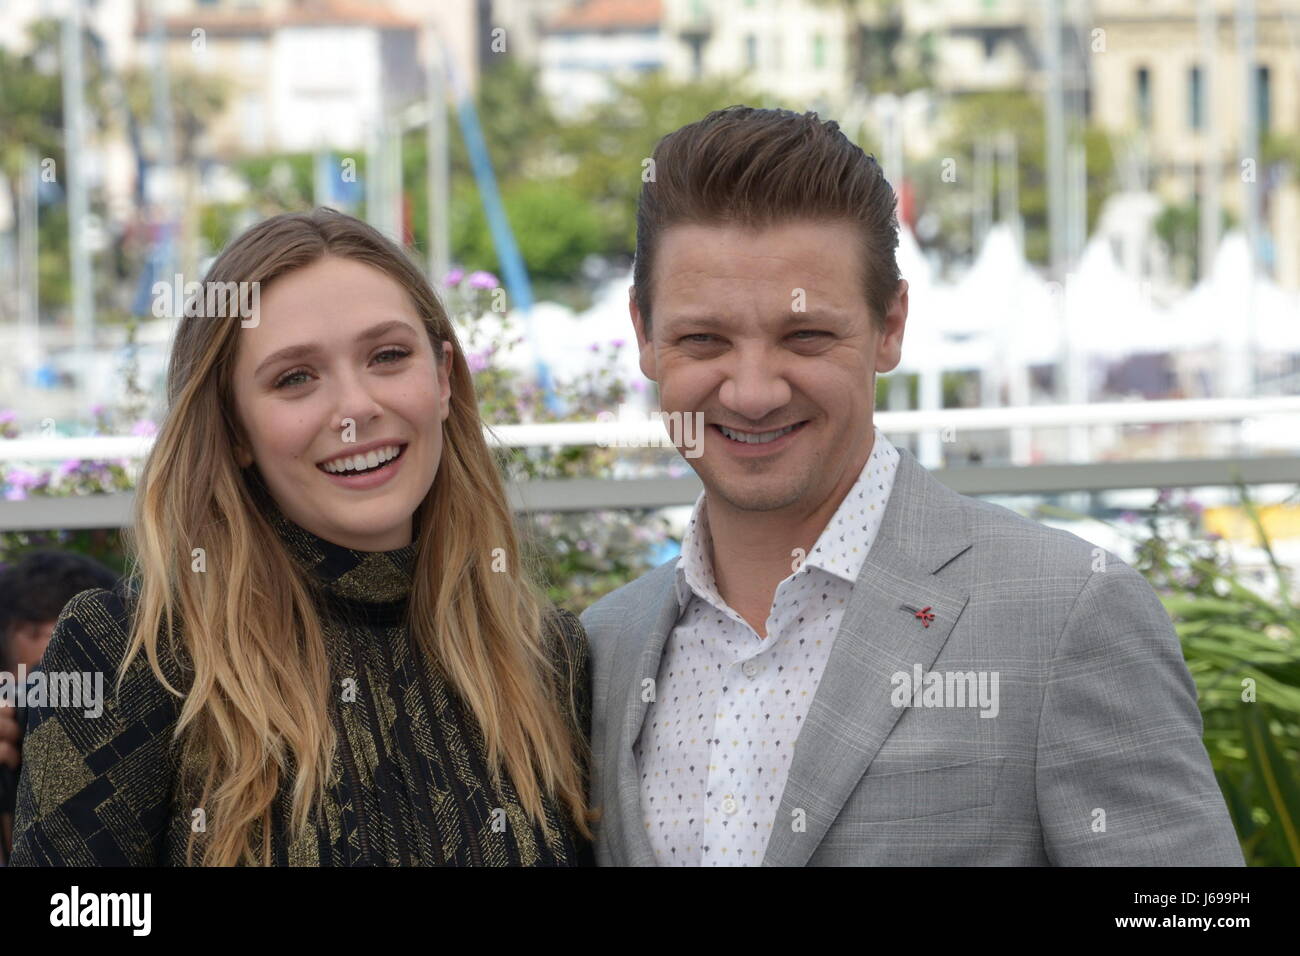 Cannes, France. 20th May, 2017. Actors ELIZABETH OLSEN and JEREMY RENNER attend the 'Wind River' photocall during the 70th annual Cannes Film Festival at Palais des Festivals. Credit: Frederick Injimbert/ZUMA Wire/Alamy Live News Stock Photo